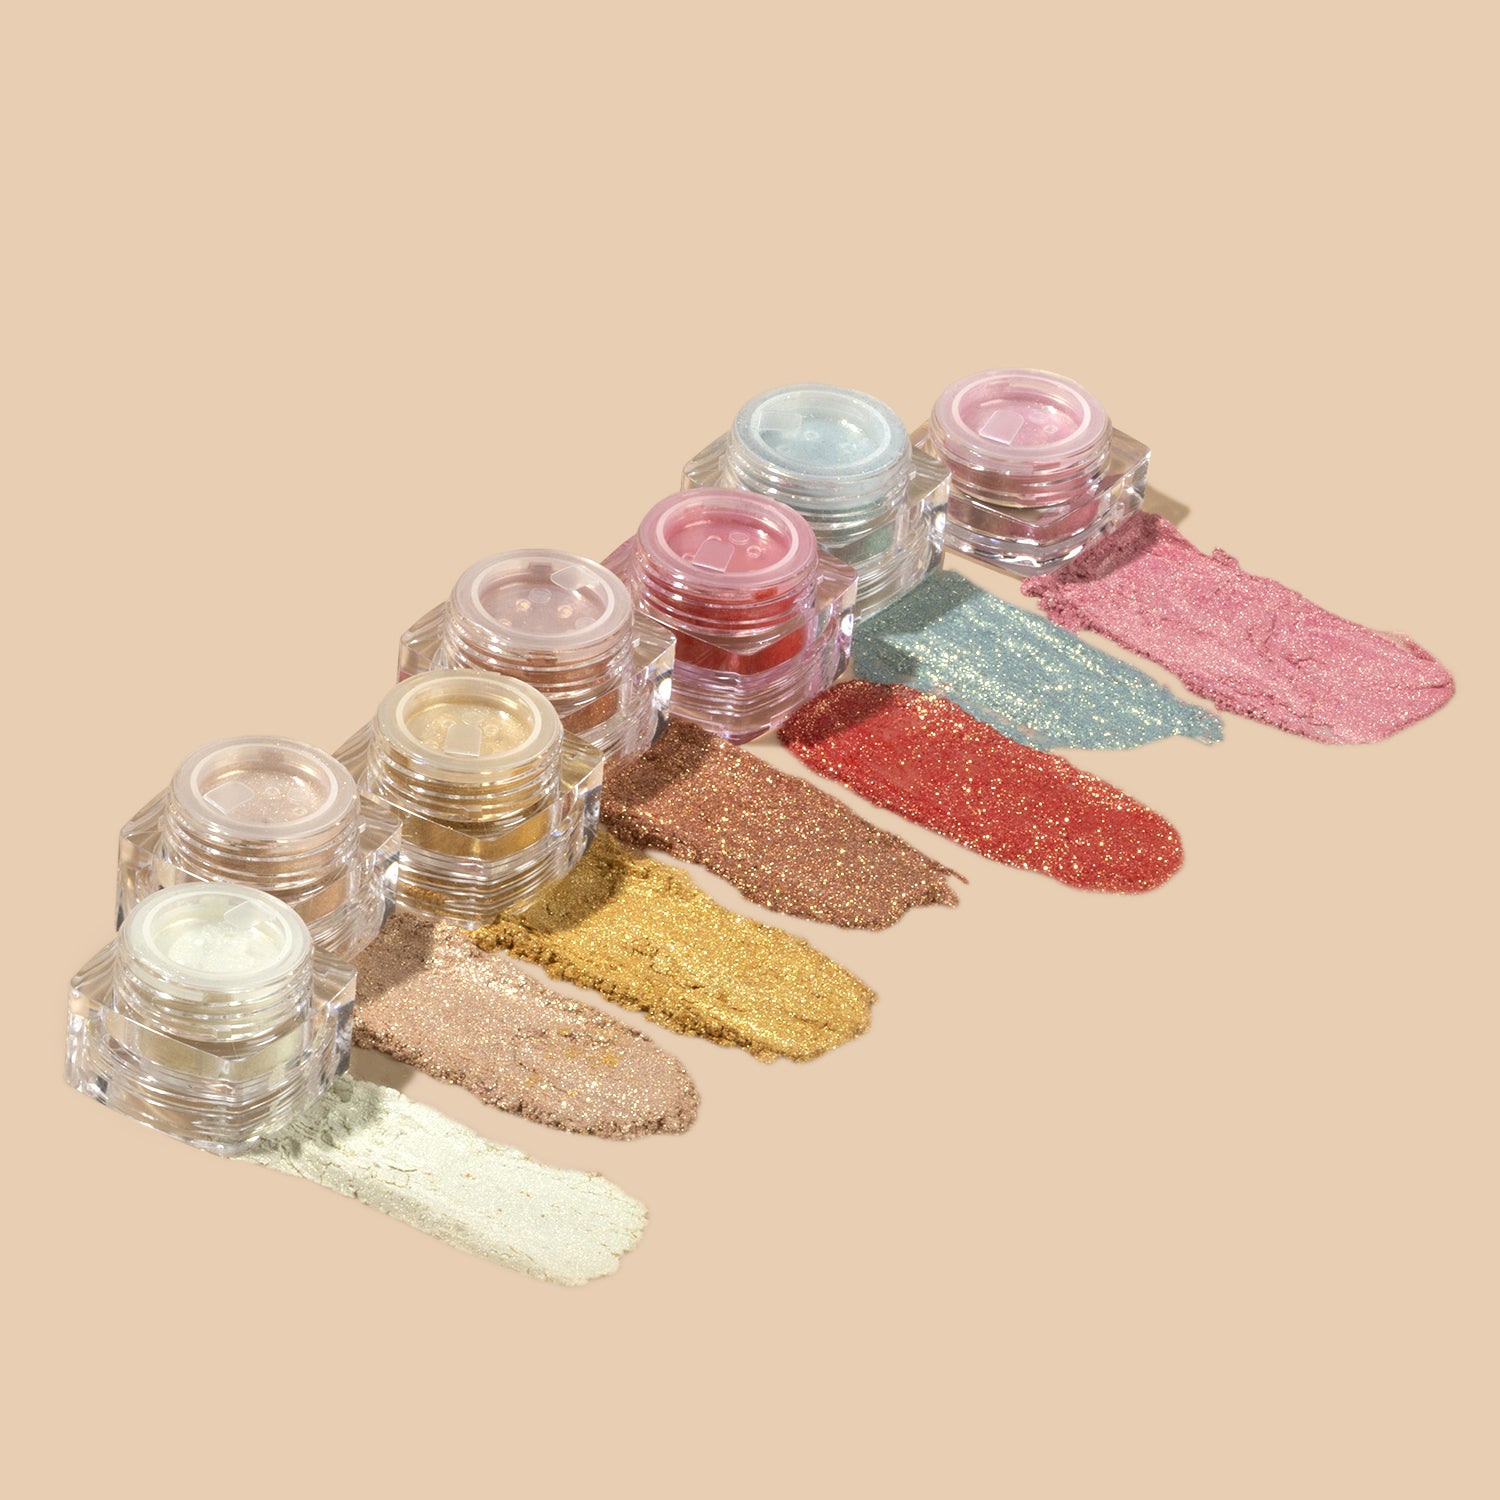 PAC Cosmetics Pigment Tower (7 in 1) (2.5 gm) #Color_02